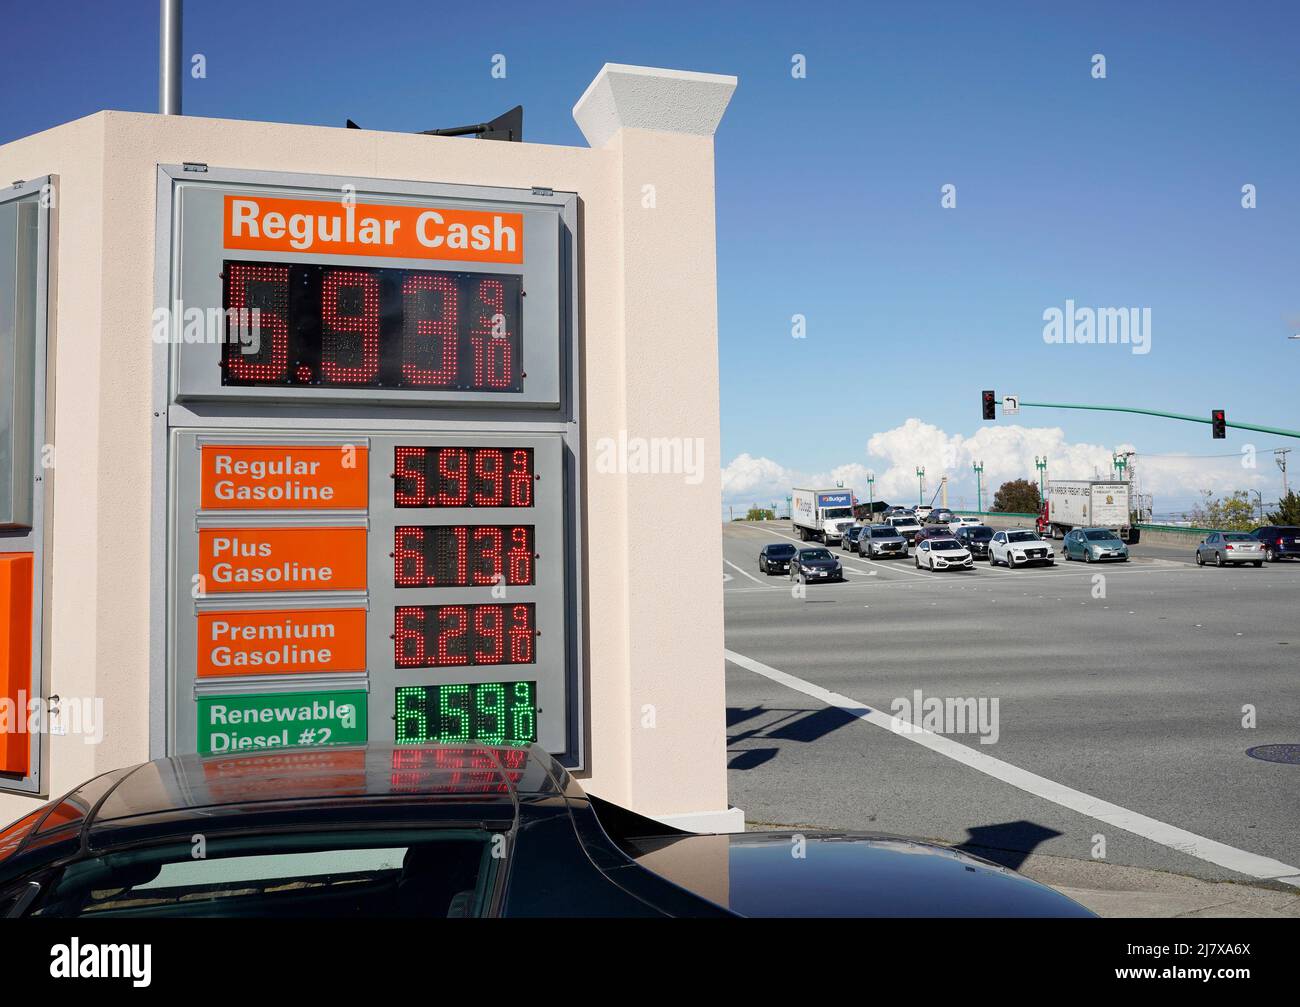 (220511) -- MILLBRAE, May 11, 2022 (Xinhua) -- Gasoline and diesel prices are displayed at a gas station in Millbrae, California, the United States, May 10, 2022. The national average prices for regular gasoline and diesel in the United States both climbed to fresh record highs Tuesday. According to the American Automobile Association (AAA), which provides the latest gas price analysis based on data from 130,000 gas stations nationwide, the regular gas price rose four cents on Tuesday to 4.37 U.S. dollars a gallon, overtaking the prior record of 4.33 dollars on March 11. (Photo by Li Jianguo Stock Photo